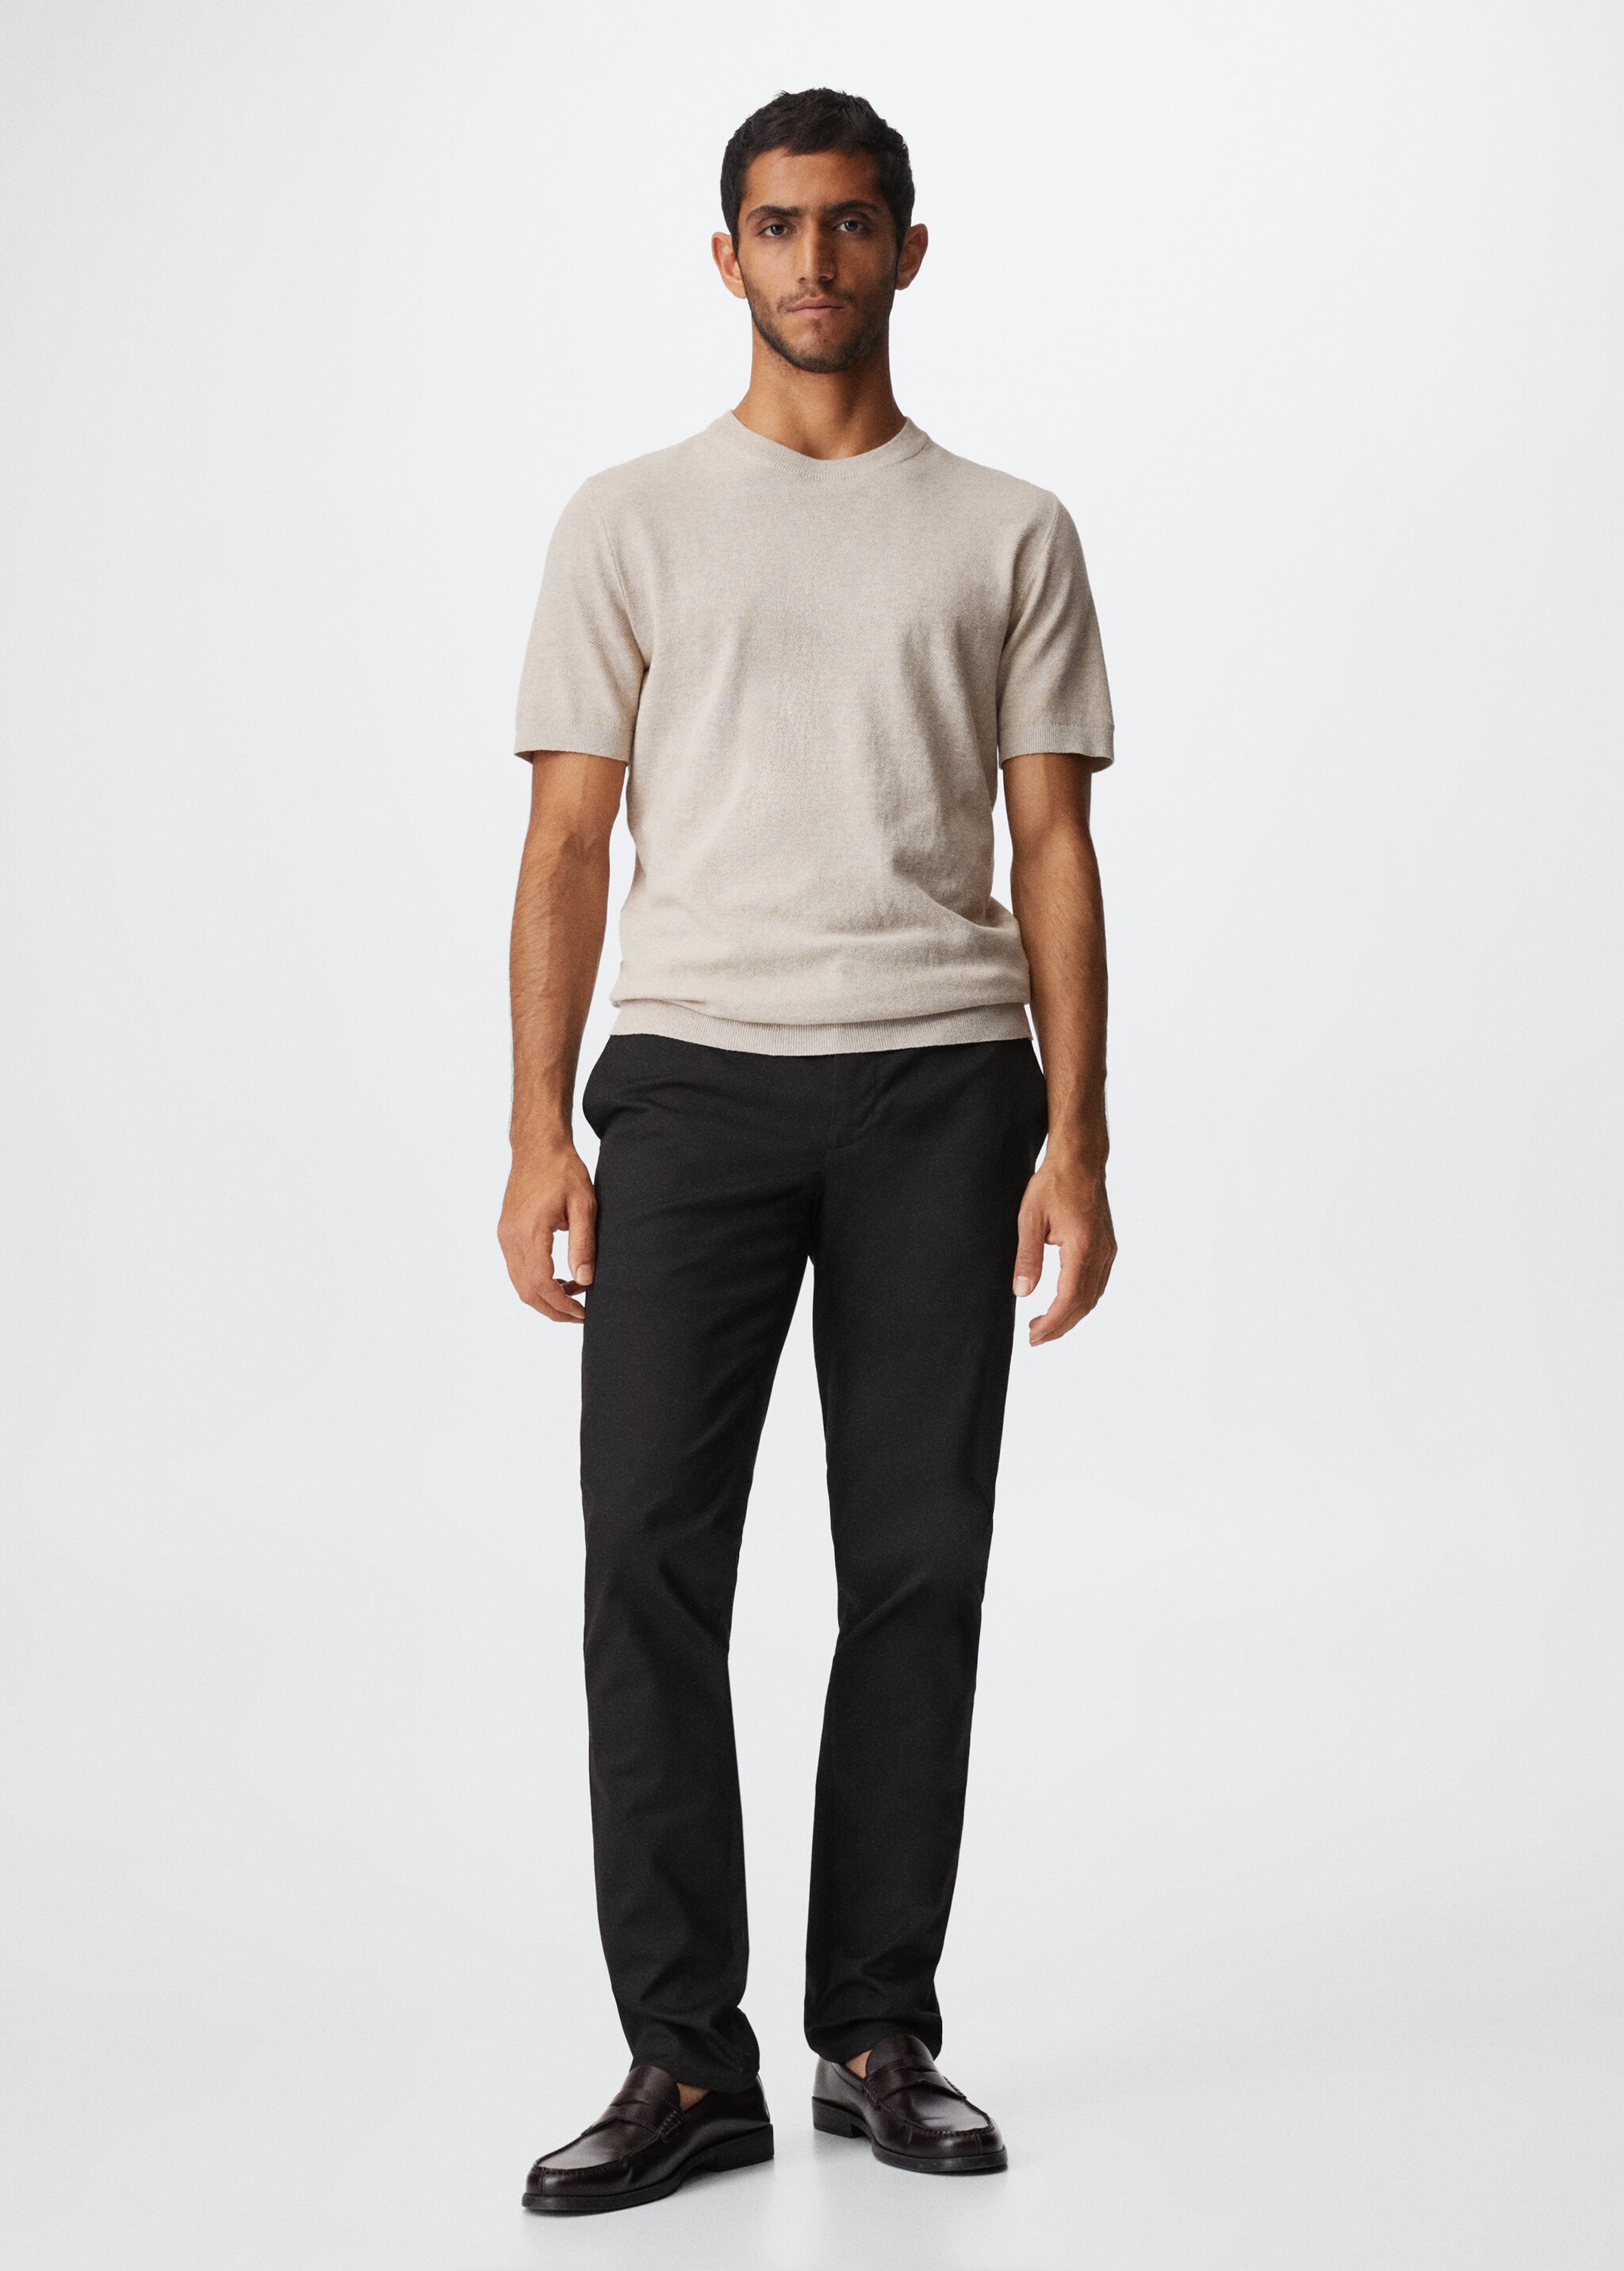 Slim fit chino trousers - General plane